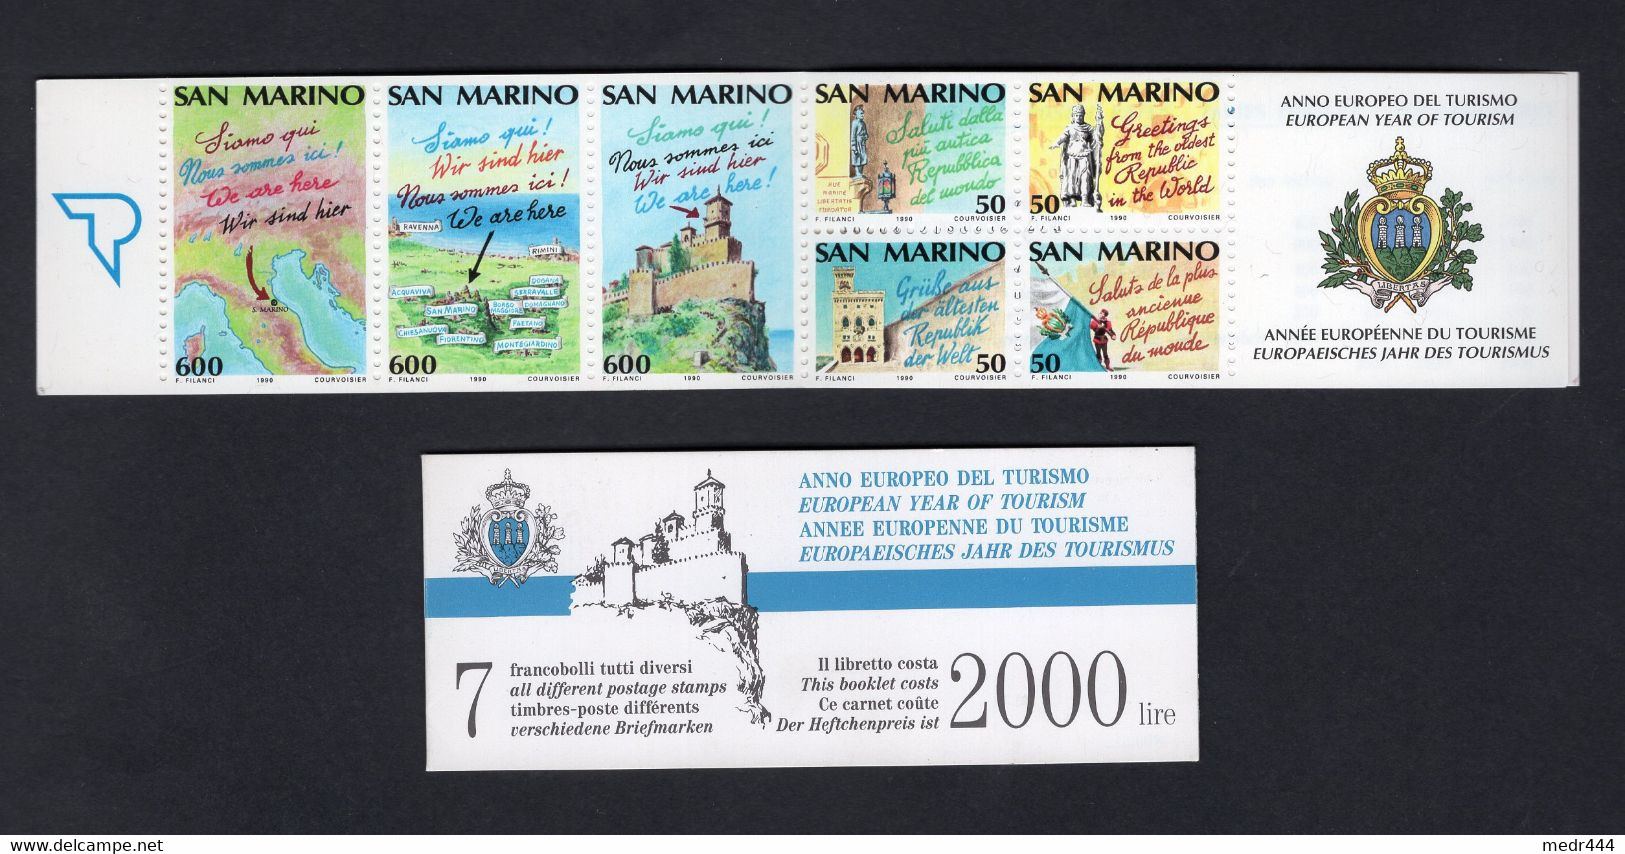 San Marino 1990 - Booklet - European Tourism Day - MNH** - Excellent Quality - Superb*** - Carnets